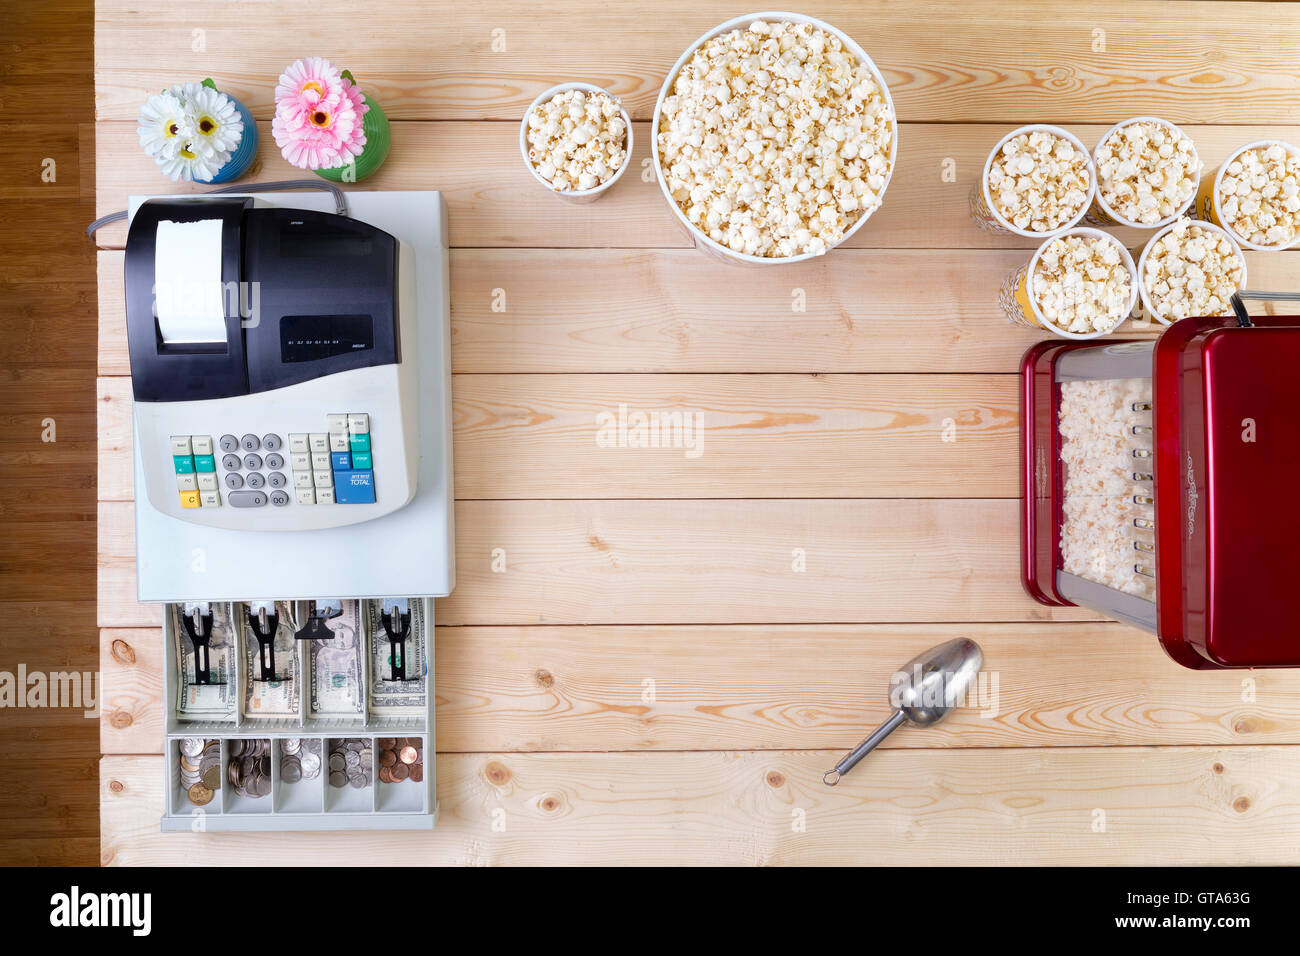 Bowls of fresh popcorn alongside a till or cash register with an open drawer displaying American dollar banknotes and coins and Stock Photo